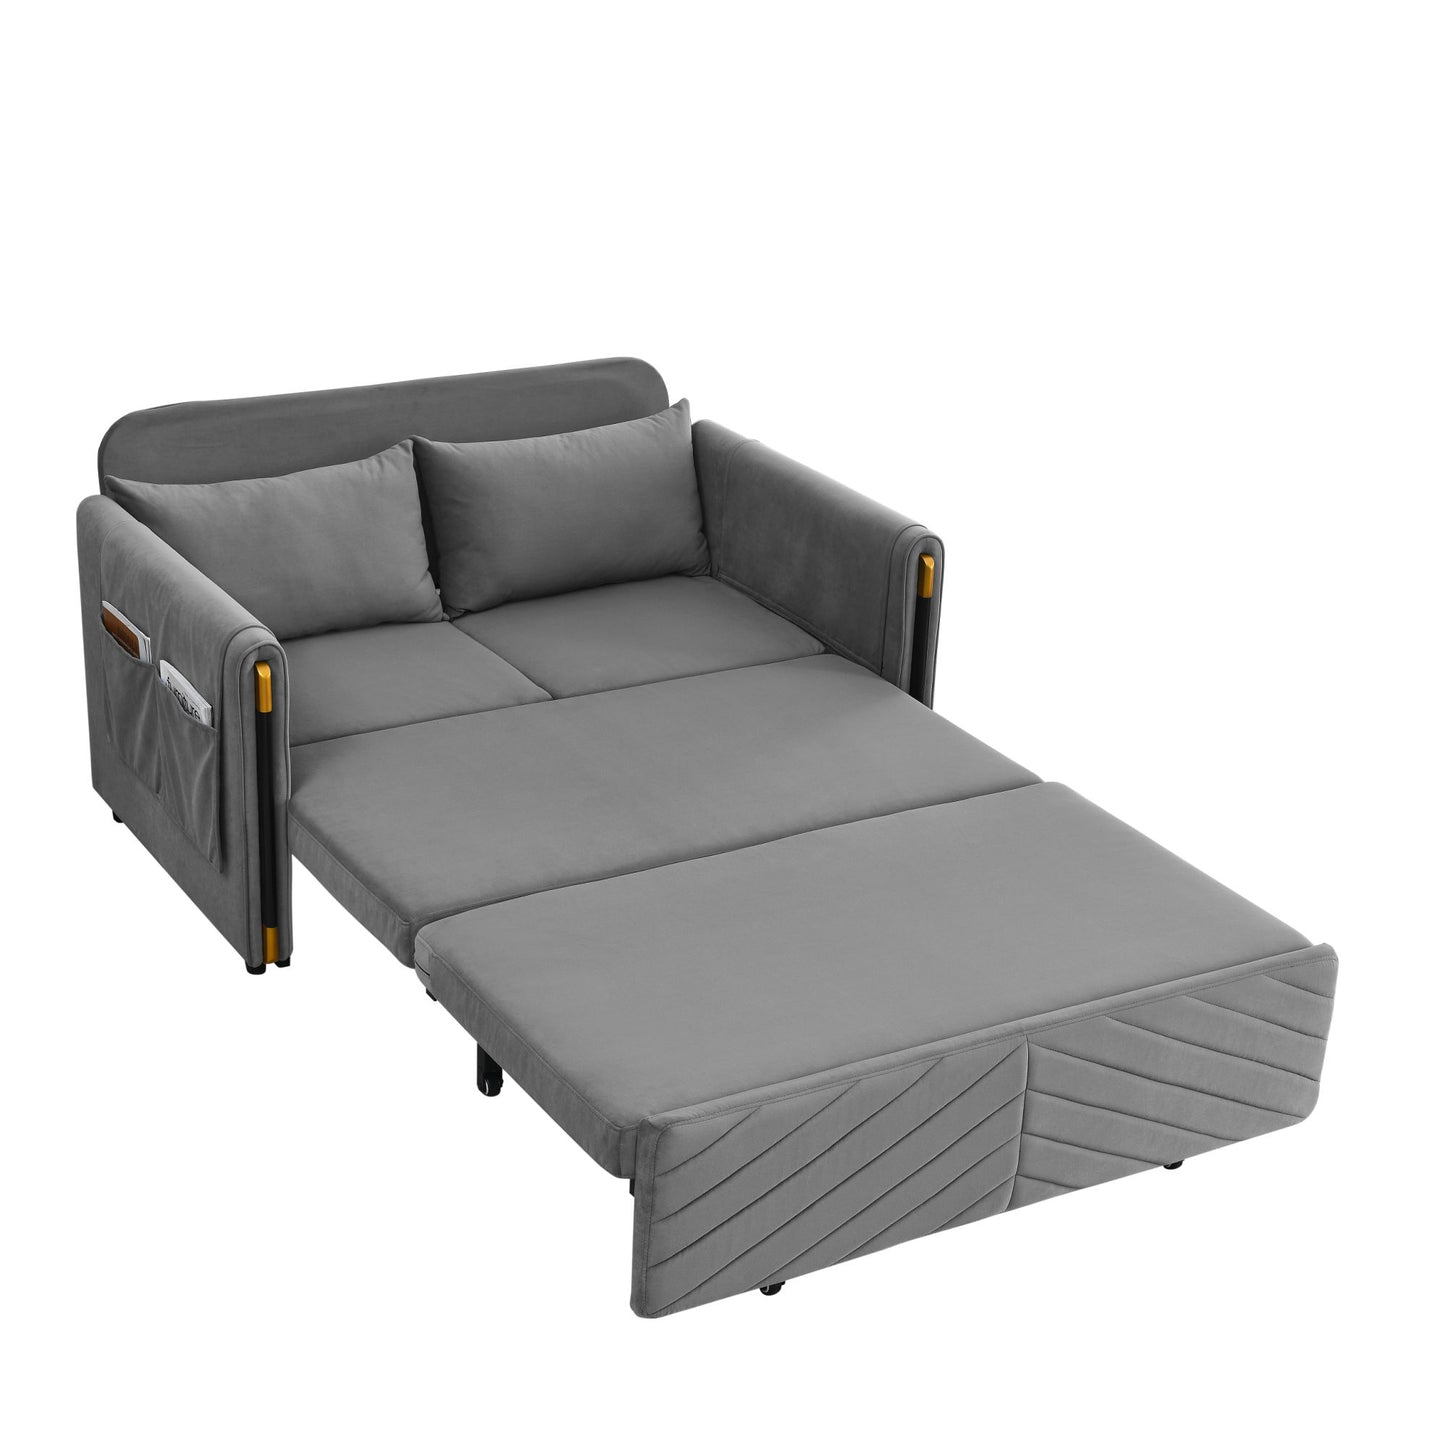 MH 54" Modern Convertible Sofa Bed with 2 Detachable Arm Pockets, Velvet Loveseat Multi-position adjustable Sofa with Pull Out Bed with Bedhead, 2 Pillows and Living Room, Grey